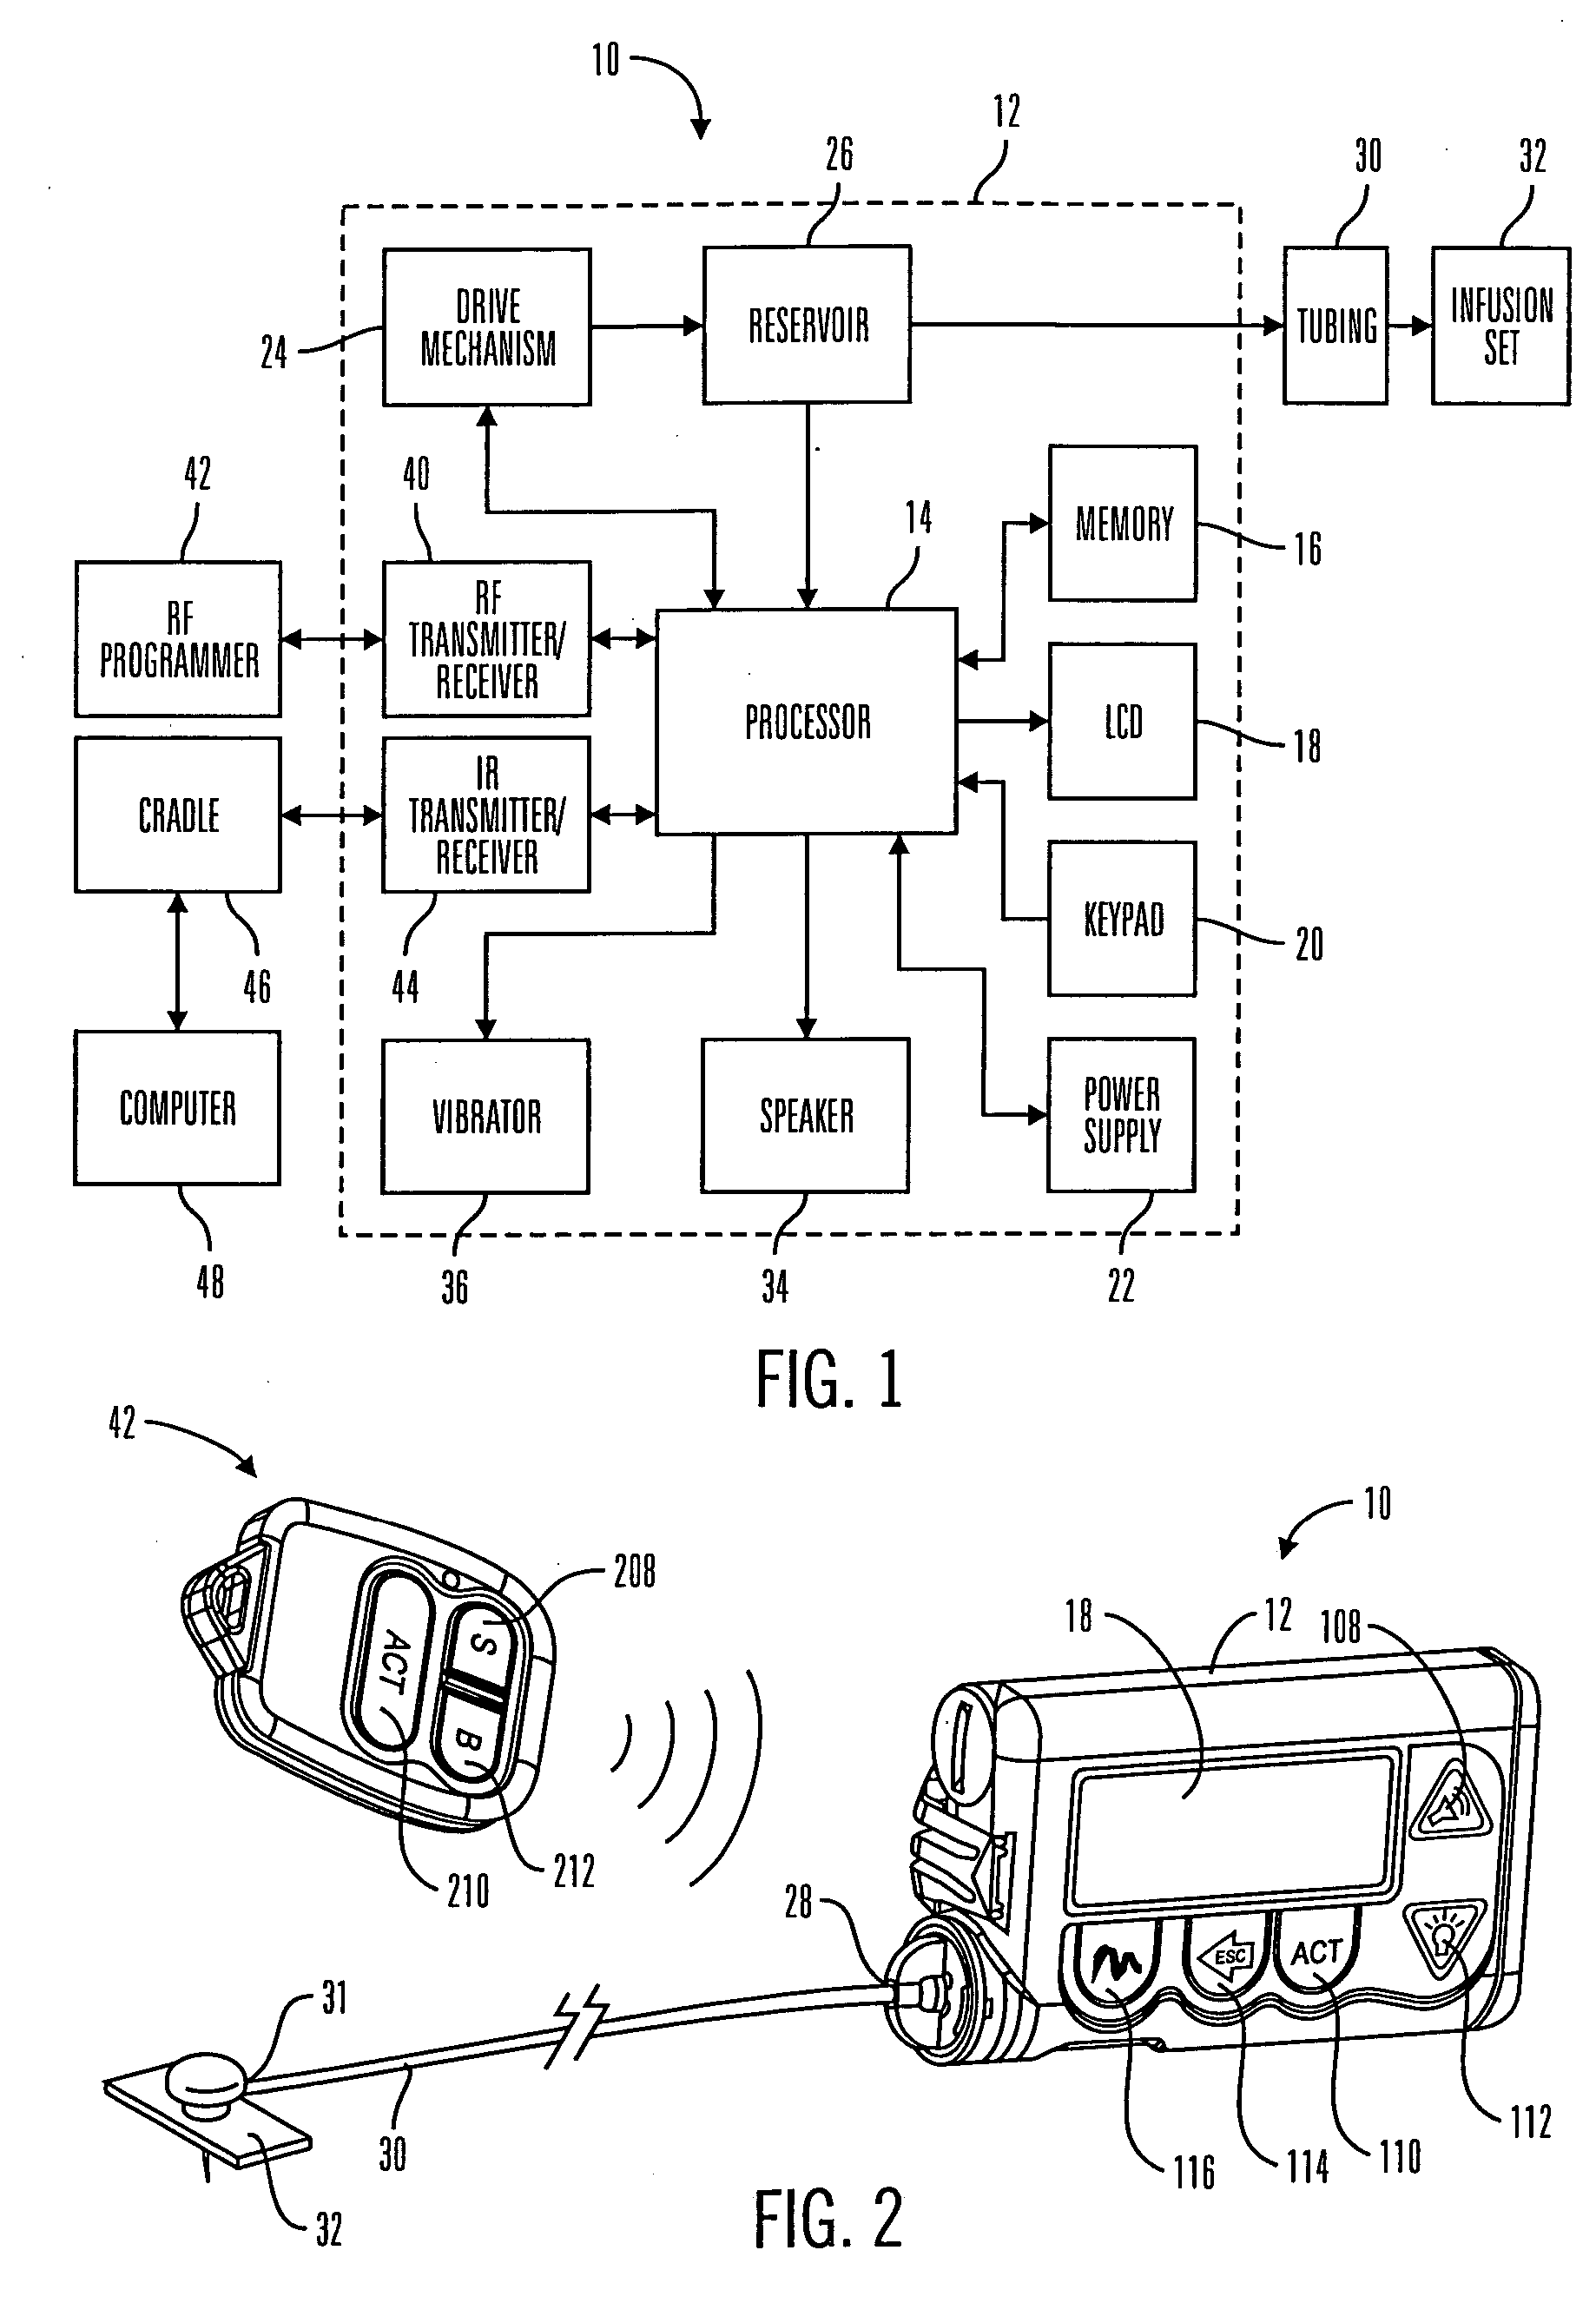 Infusion device menu structure and method of using the same